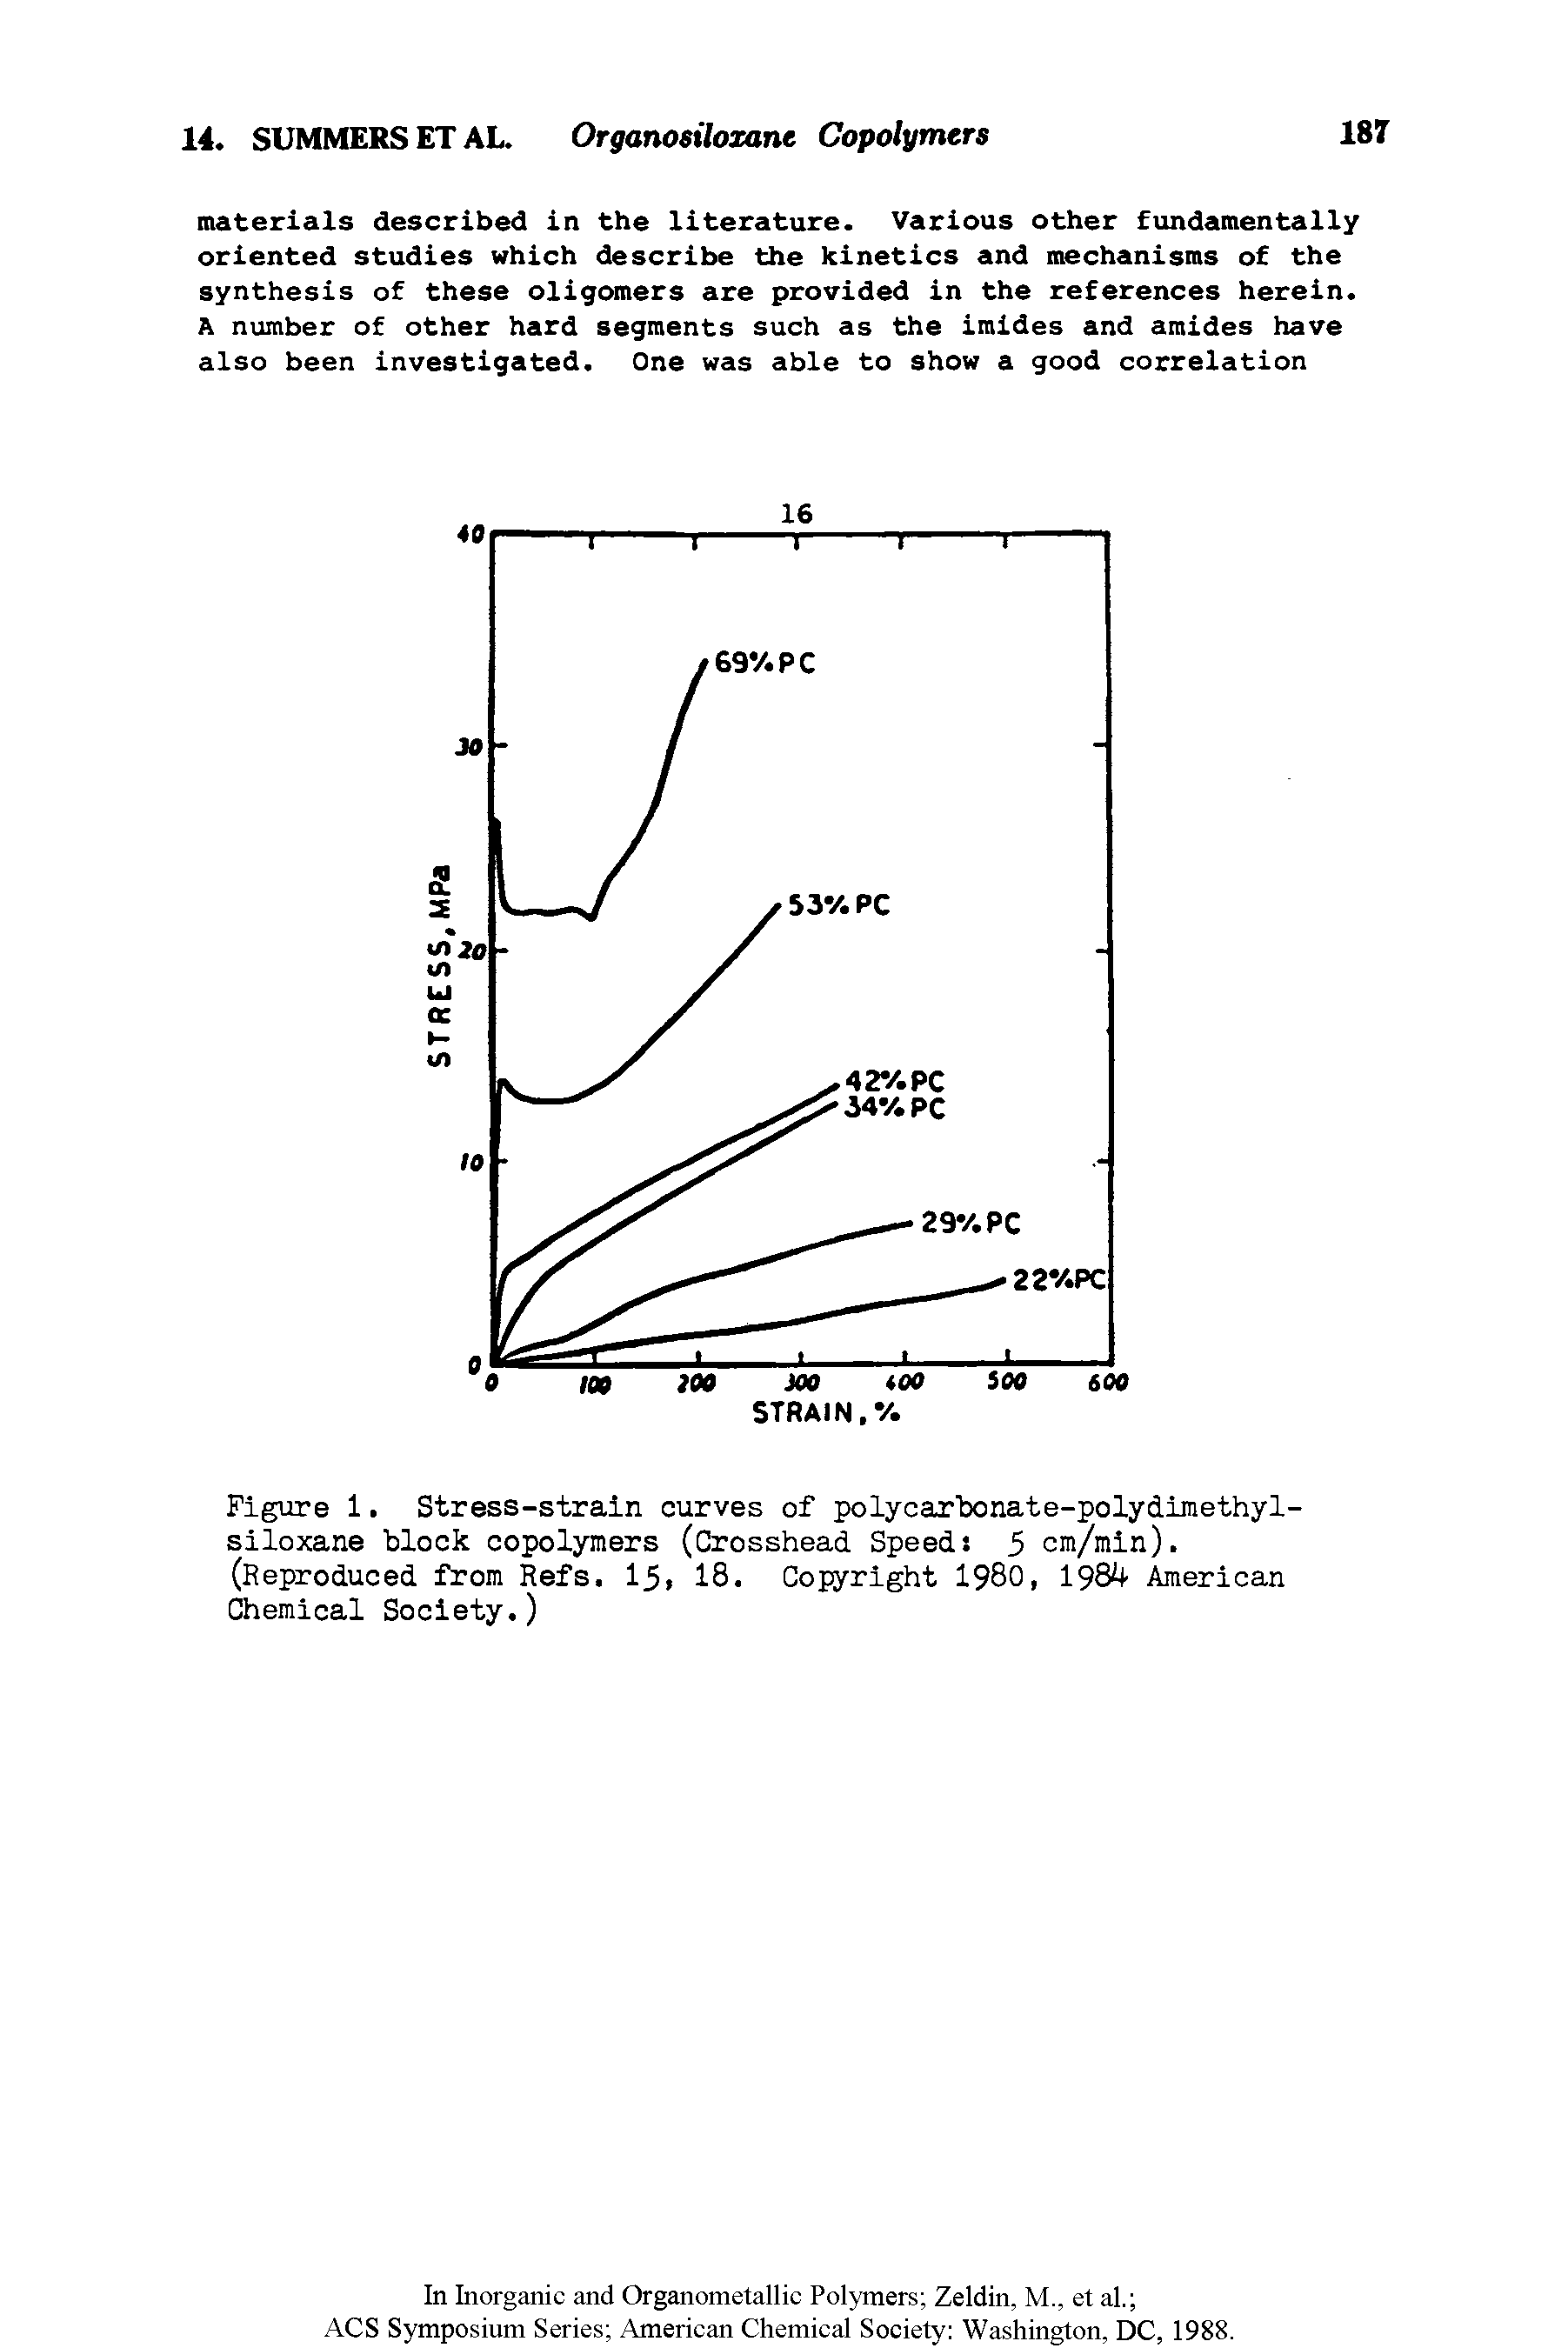 Figure 1. Stress-strain curves of polycarbonate-polydimethyl-siloxane block copolymers (Crosshead Speeds 5 cm/min). (Reproduced from Refs. 15 18. Copyright 1980, 1984 American Chemical Society.)...